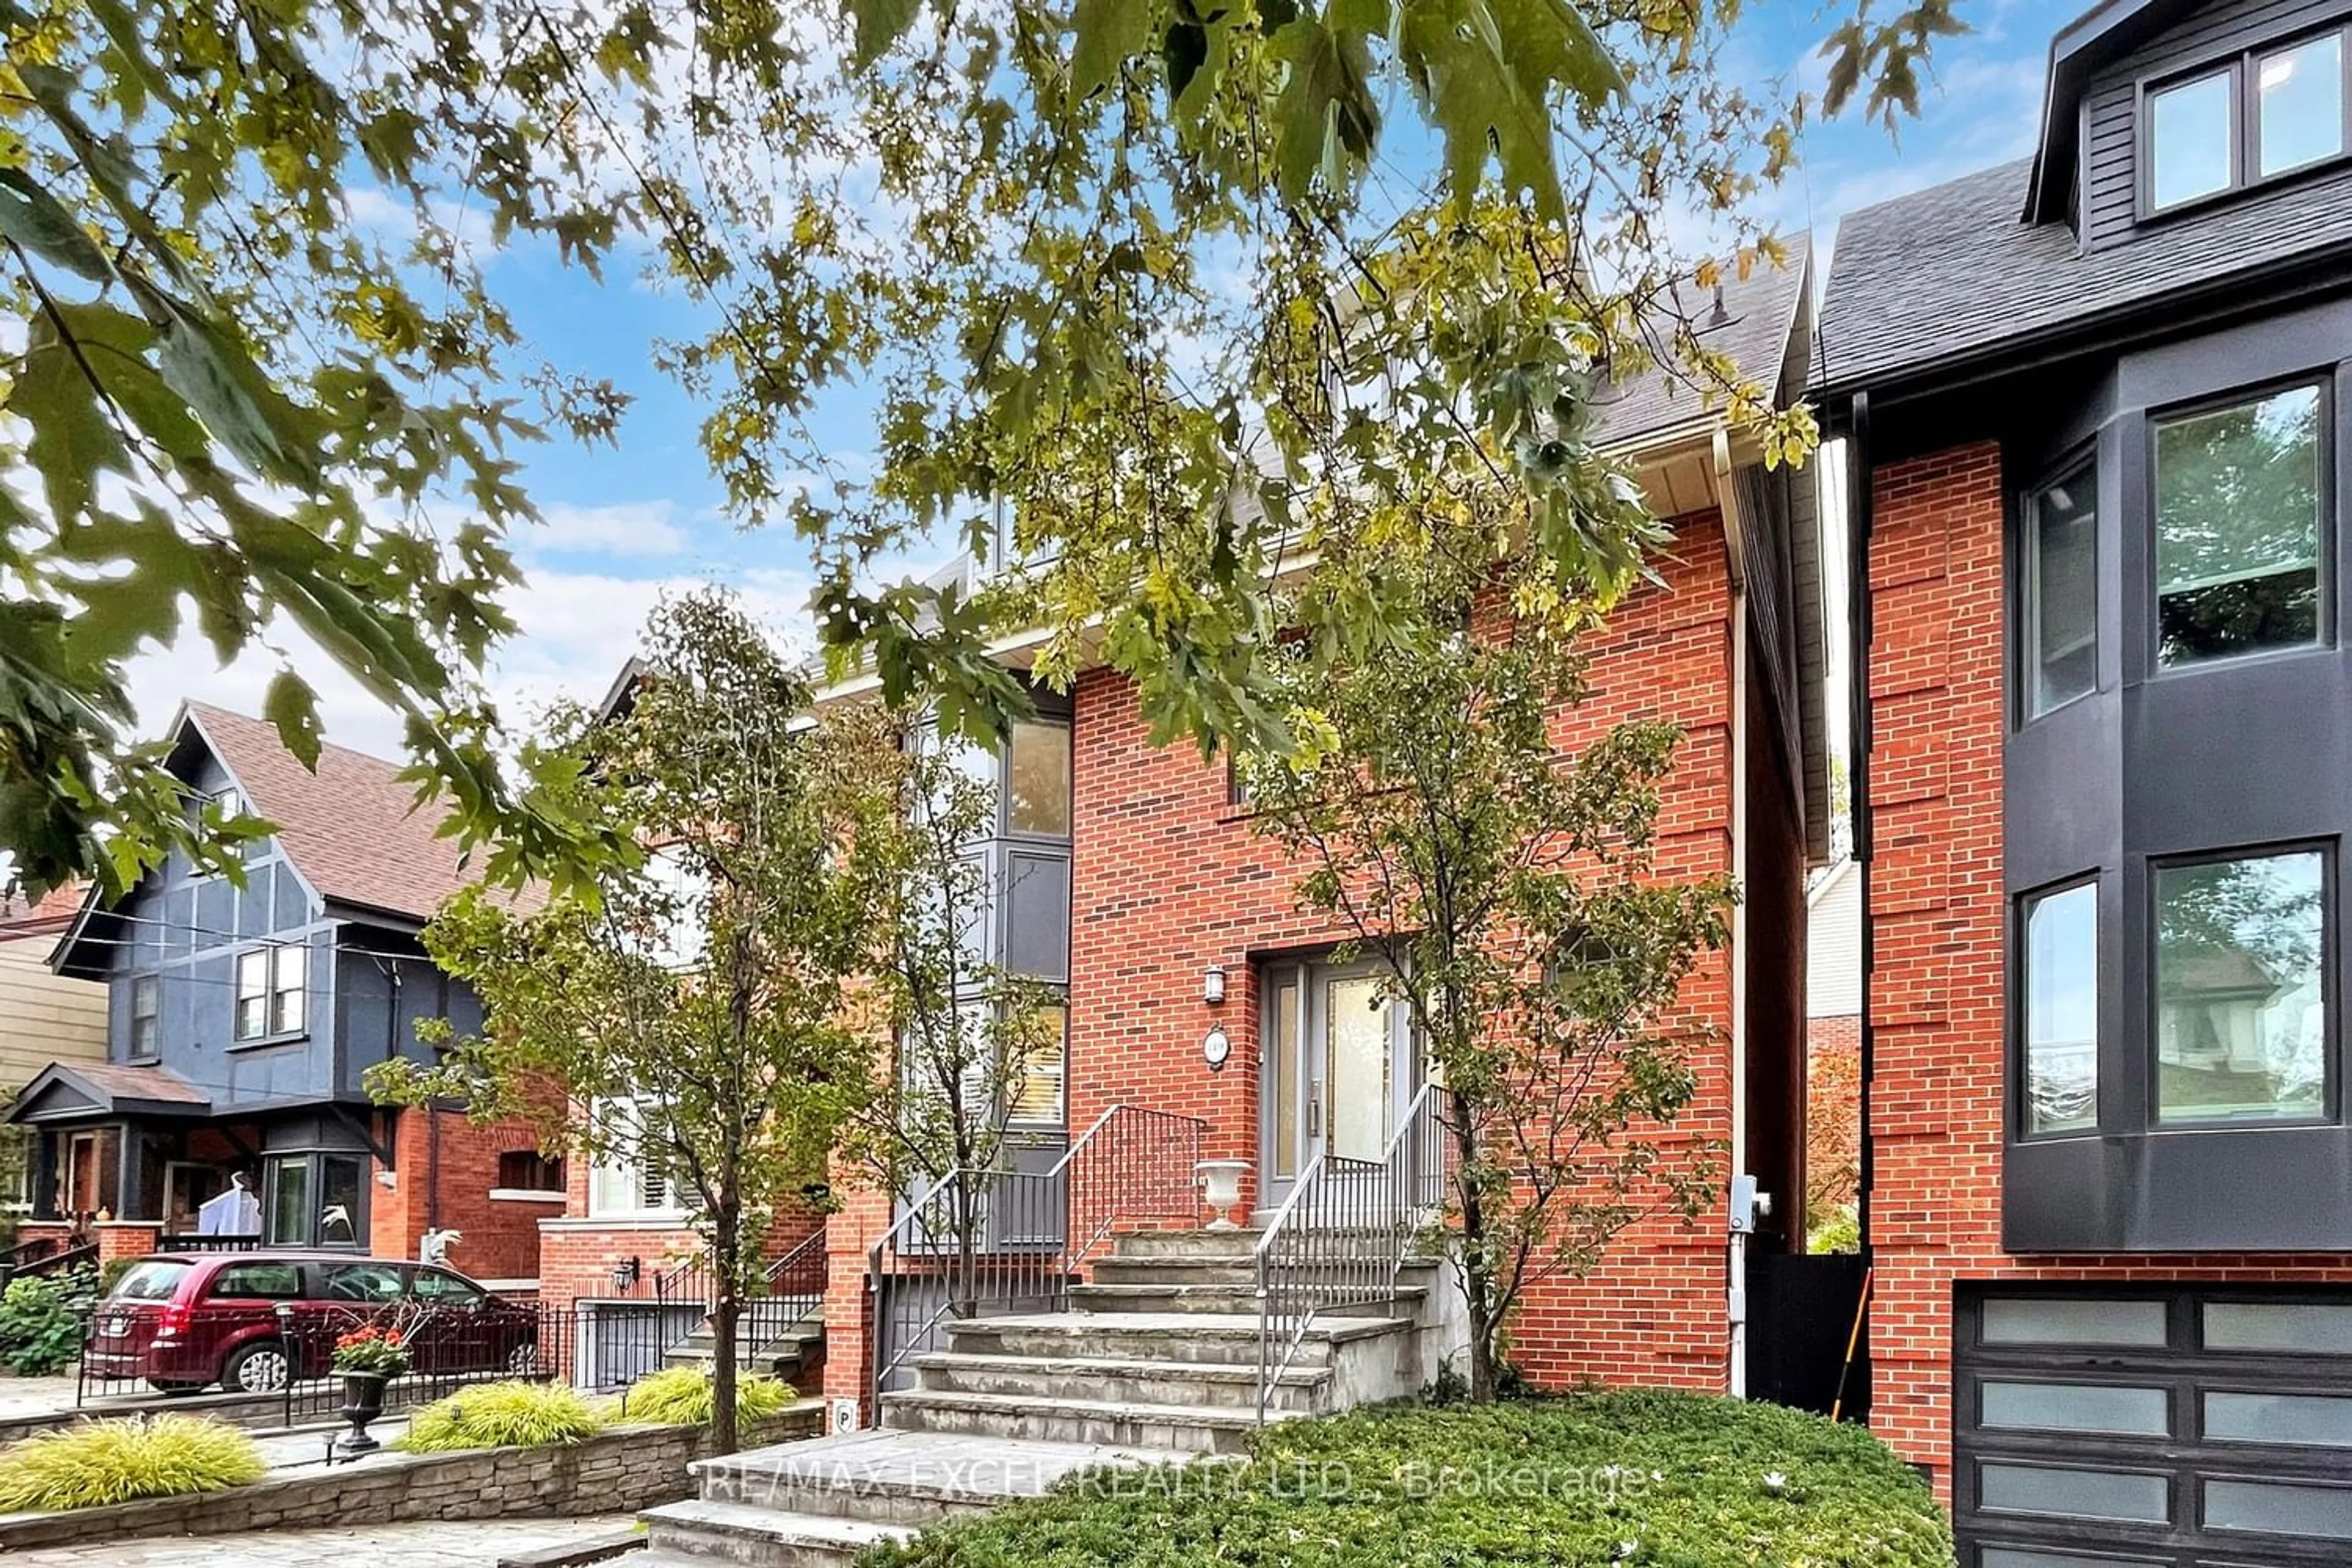 Home with brick exterior material for 149 Sherwood Ave, Toronto Ontario M4P 2A9